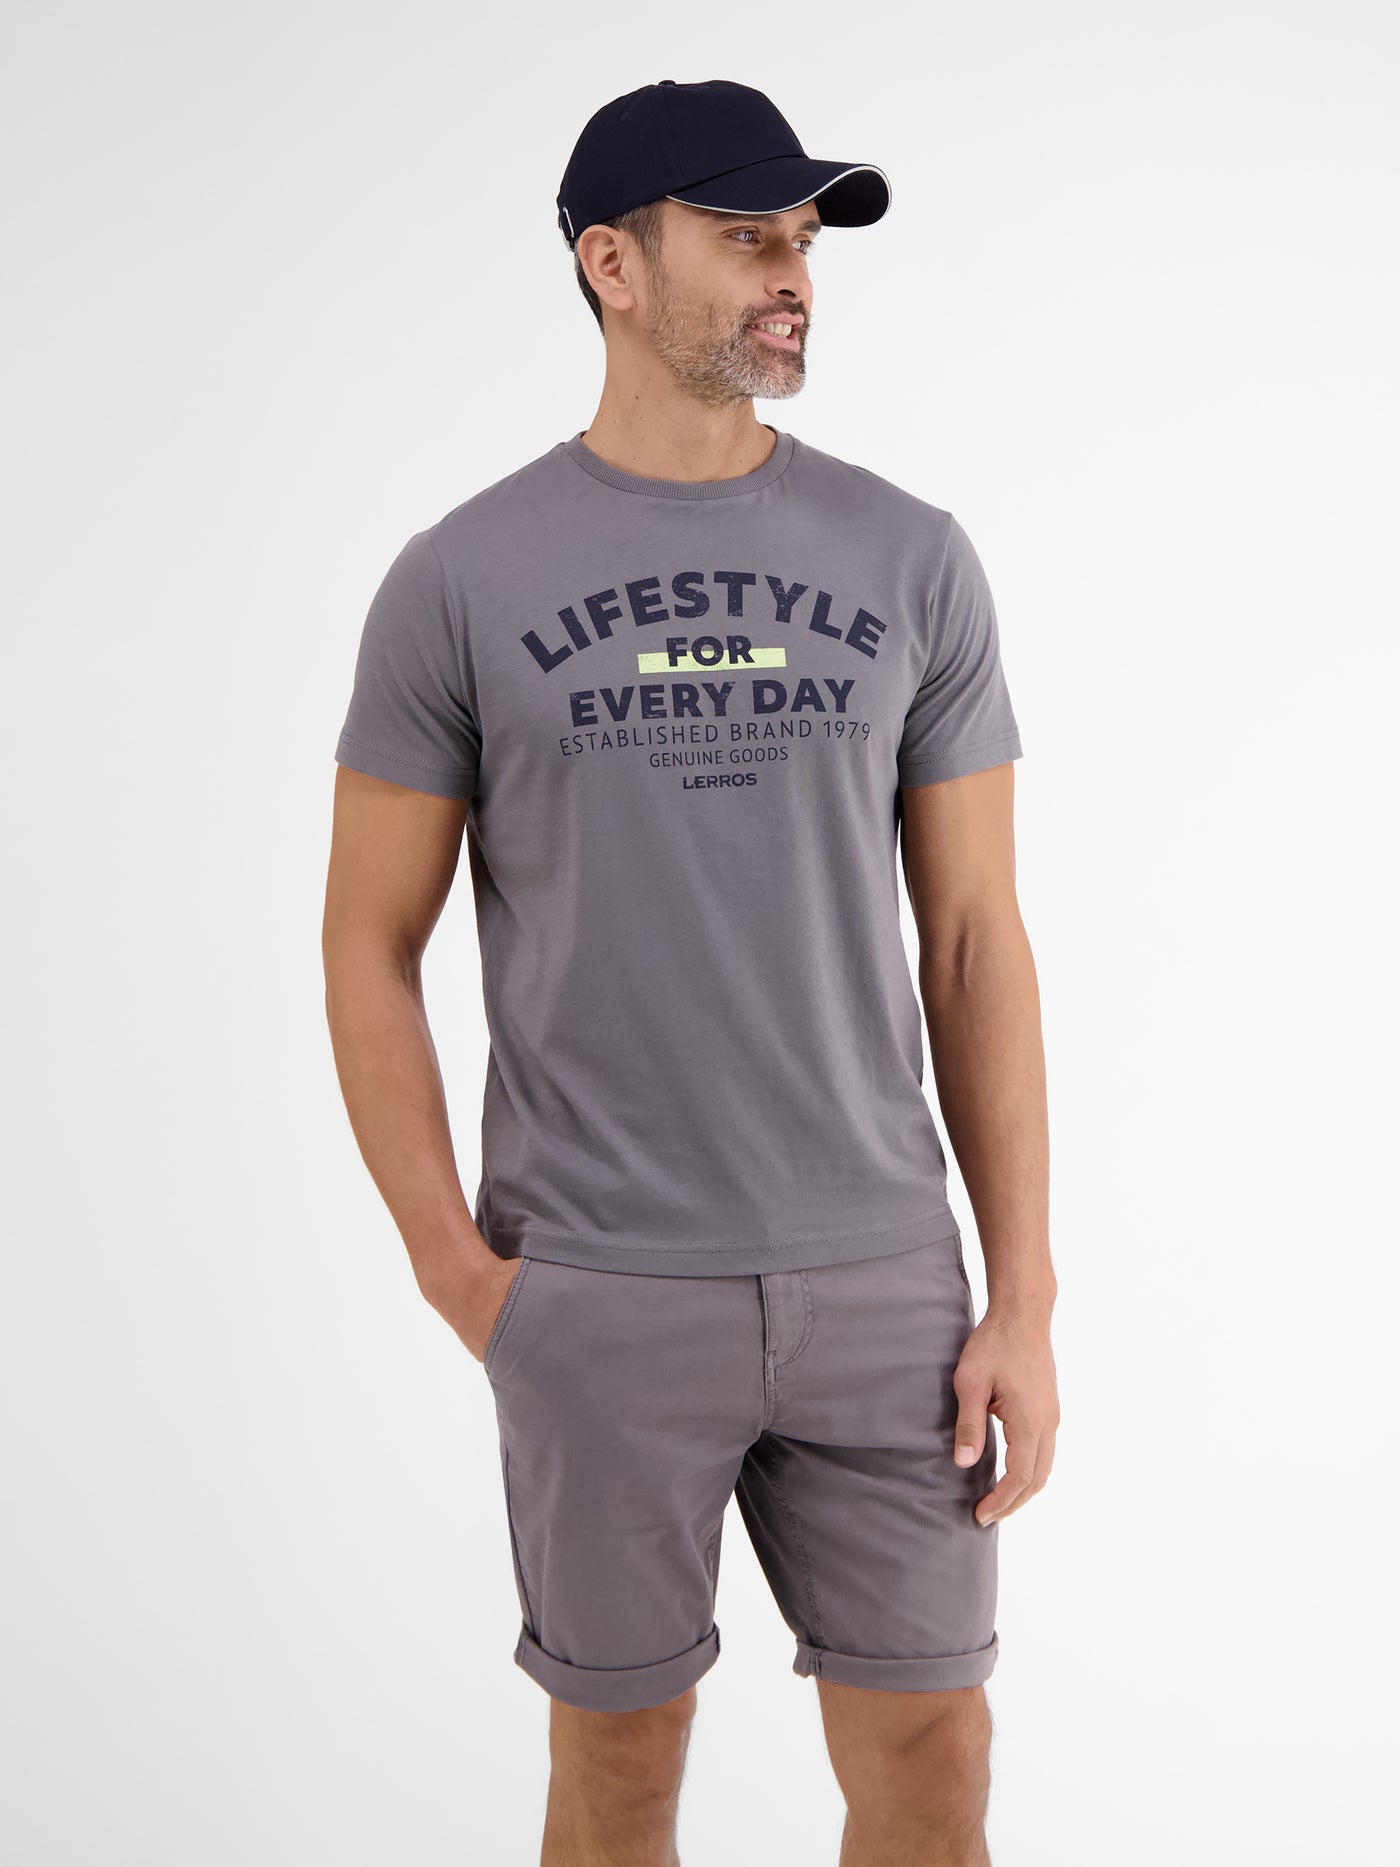 T-Shirt *Lifestyle for every day* SHOP LERROS –